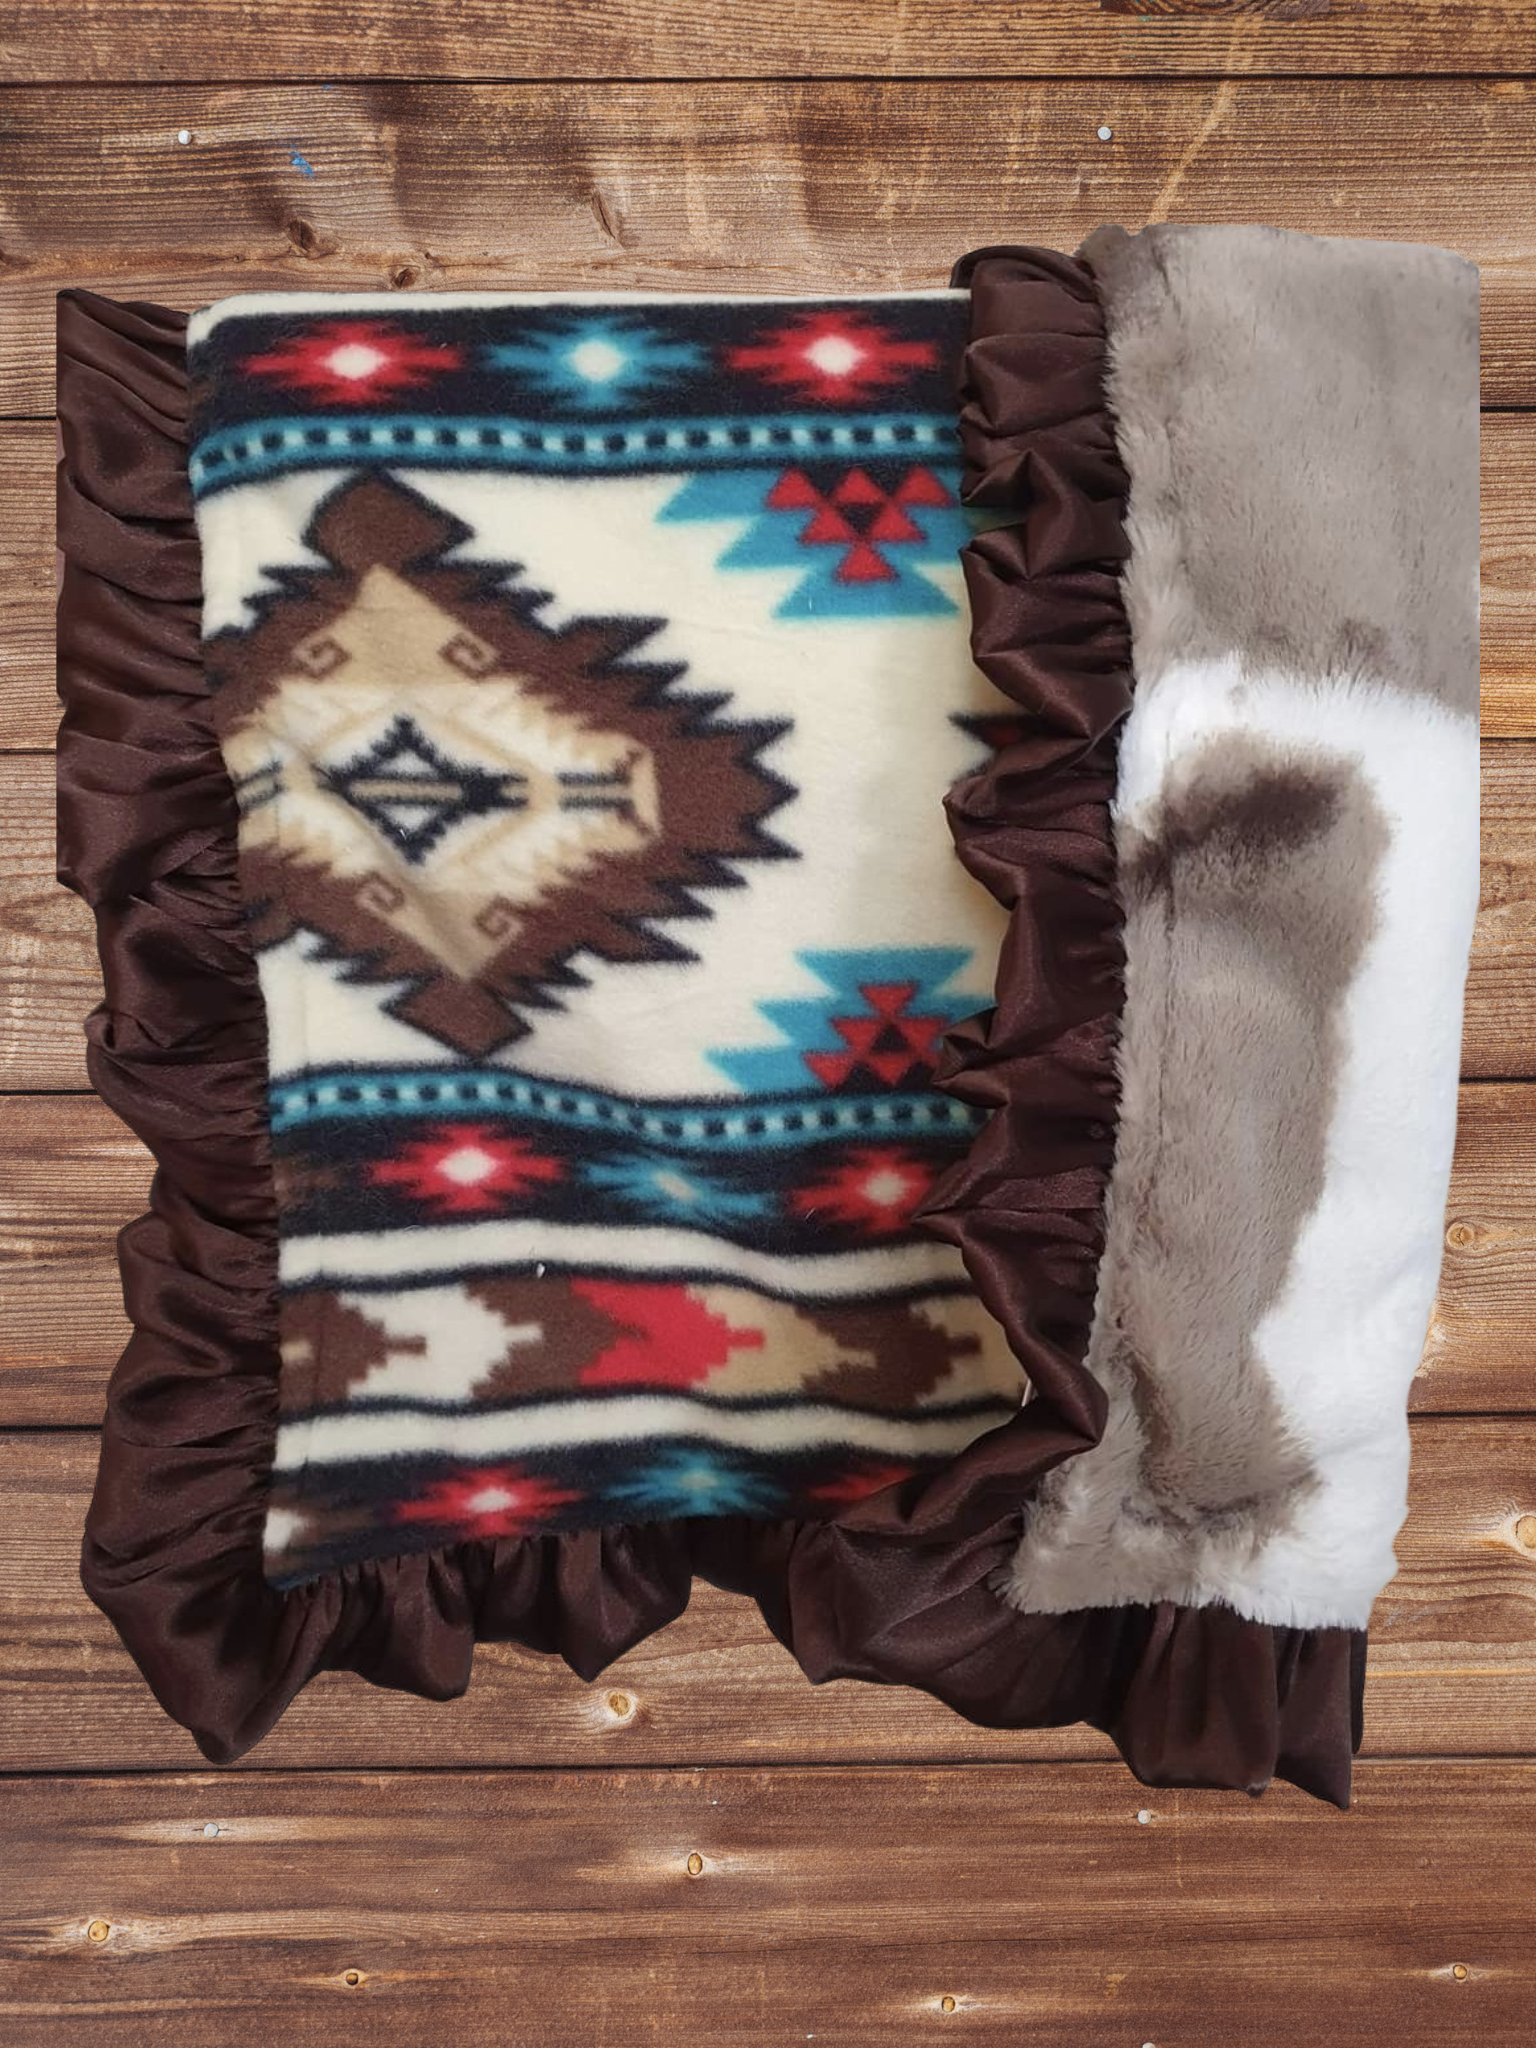 Ruffle Baby Blanket - Cream Aztec and Brown Sugar Cow Minky Western Blanket - DBC Baby Bedding Co 